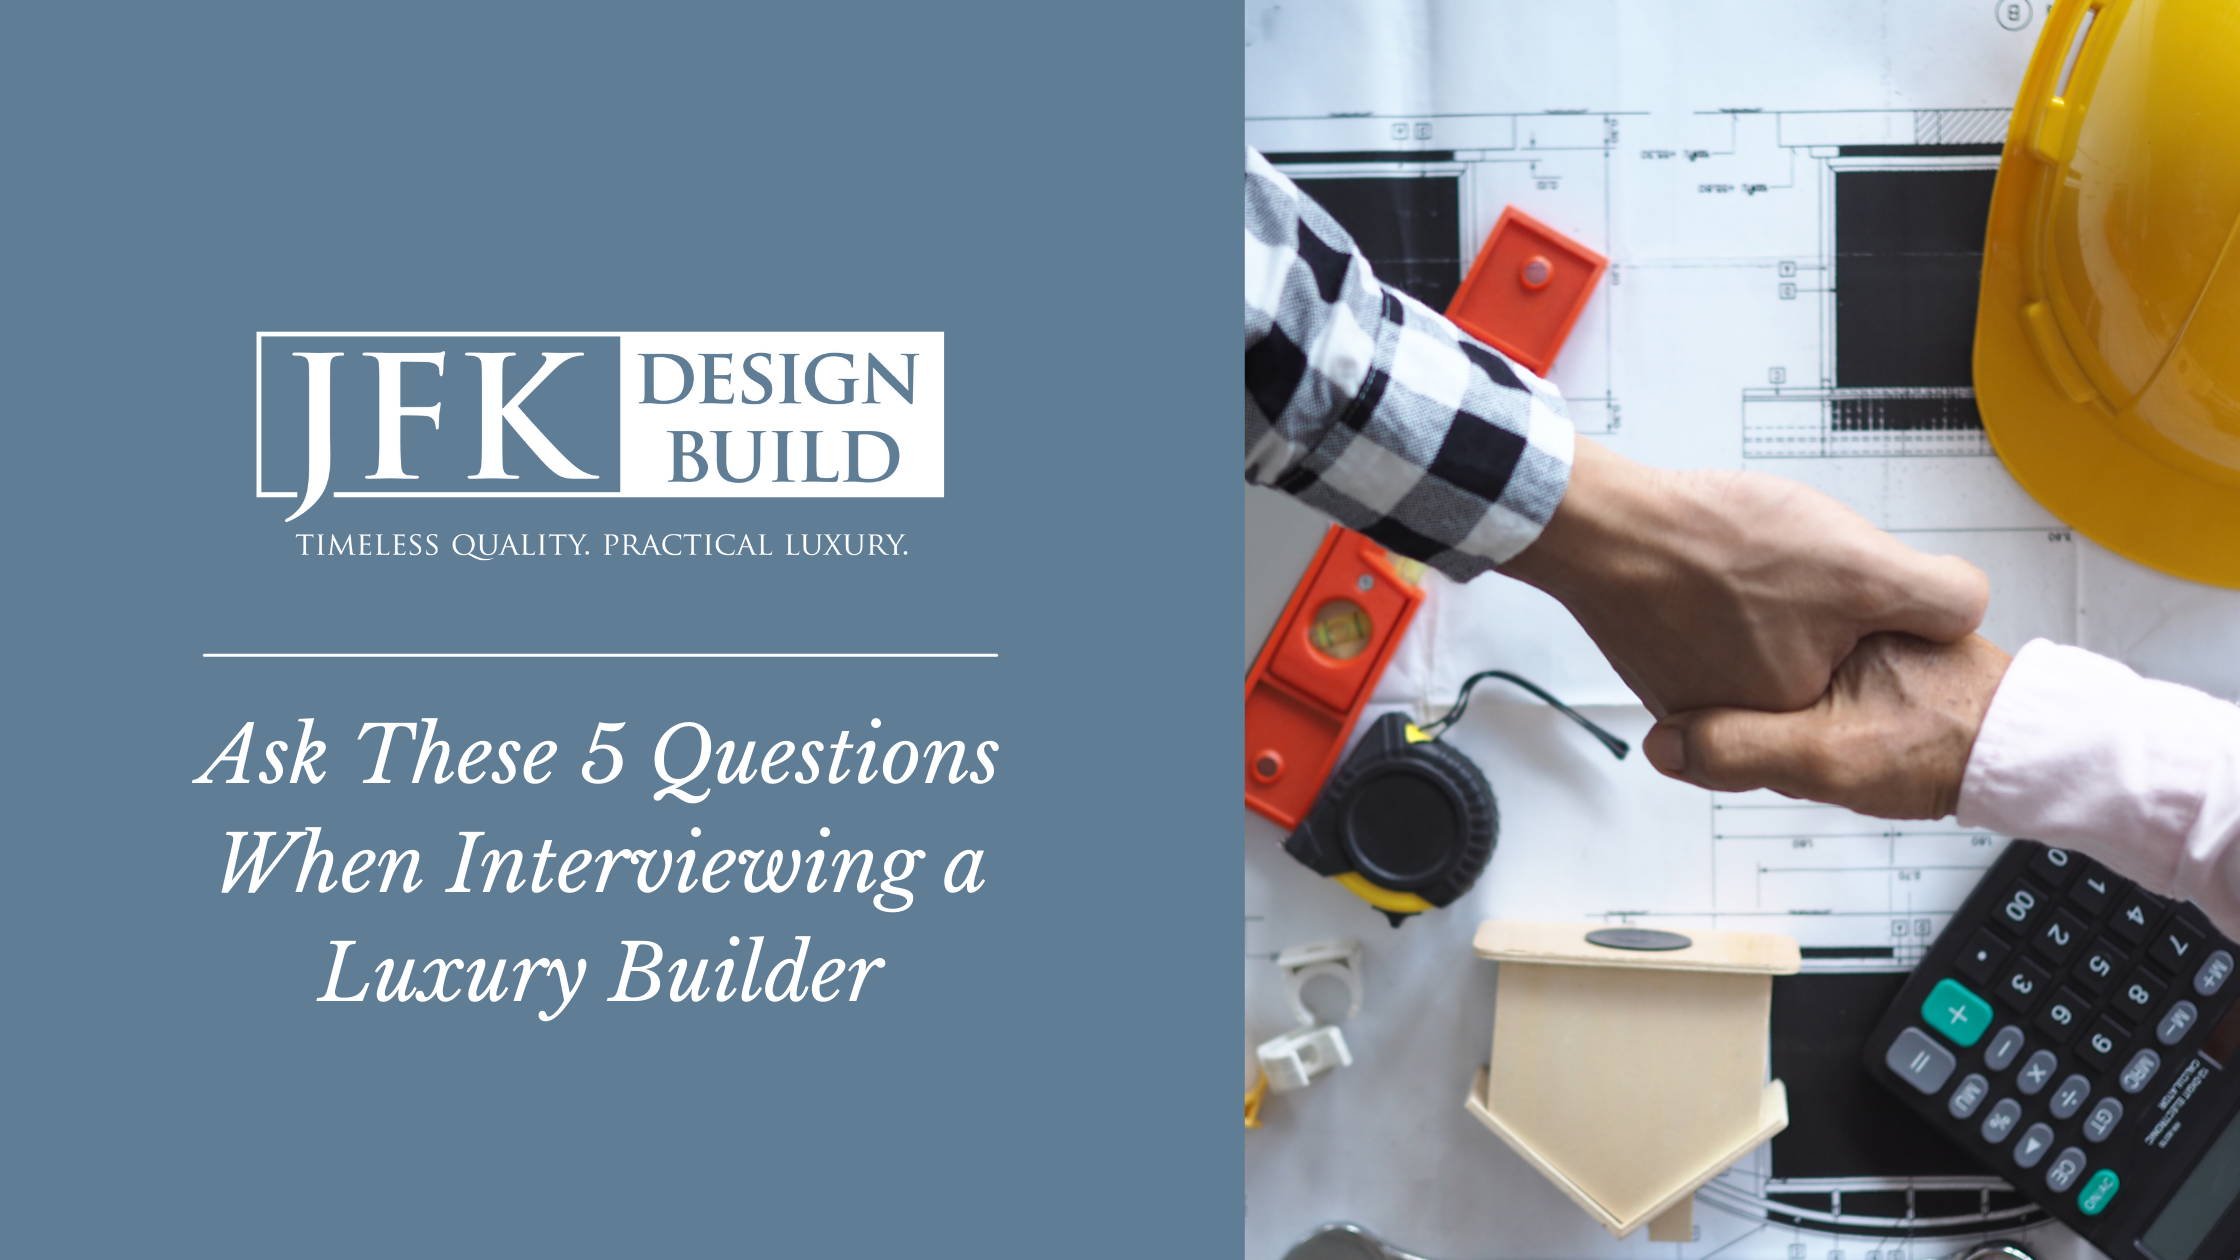 A photo of a shaking hands next to a blue block with white text "Ask these 5 questions when interviewing a luxury builder" and a white JFK Design Build logo